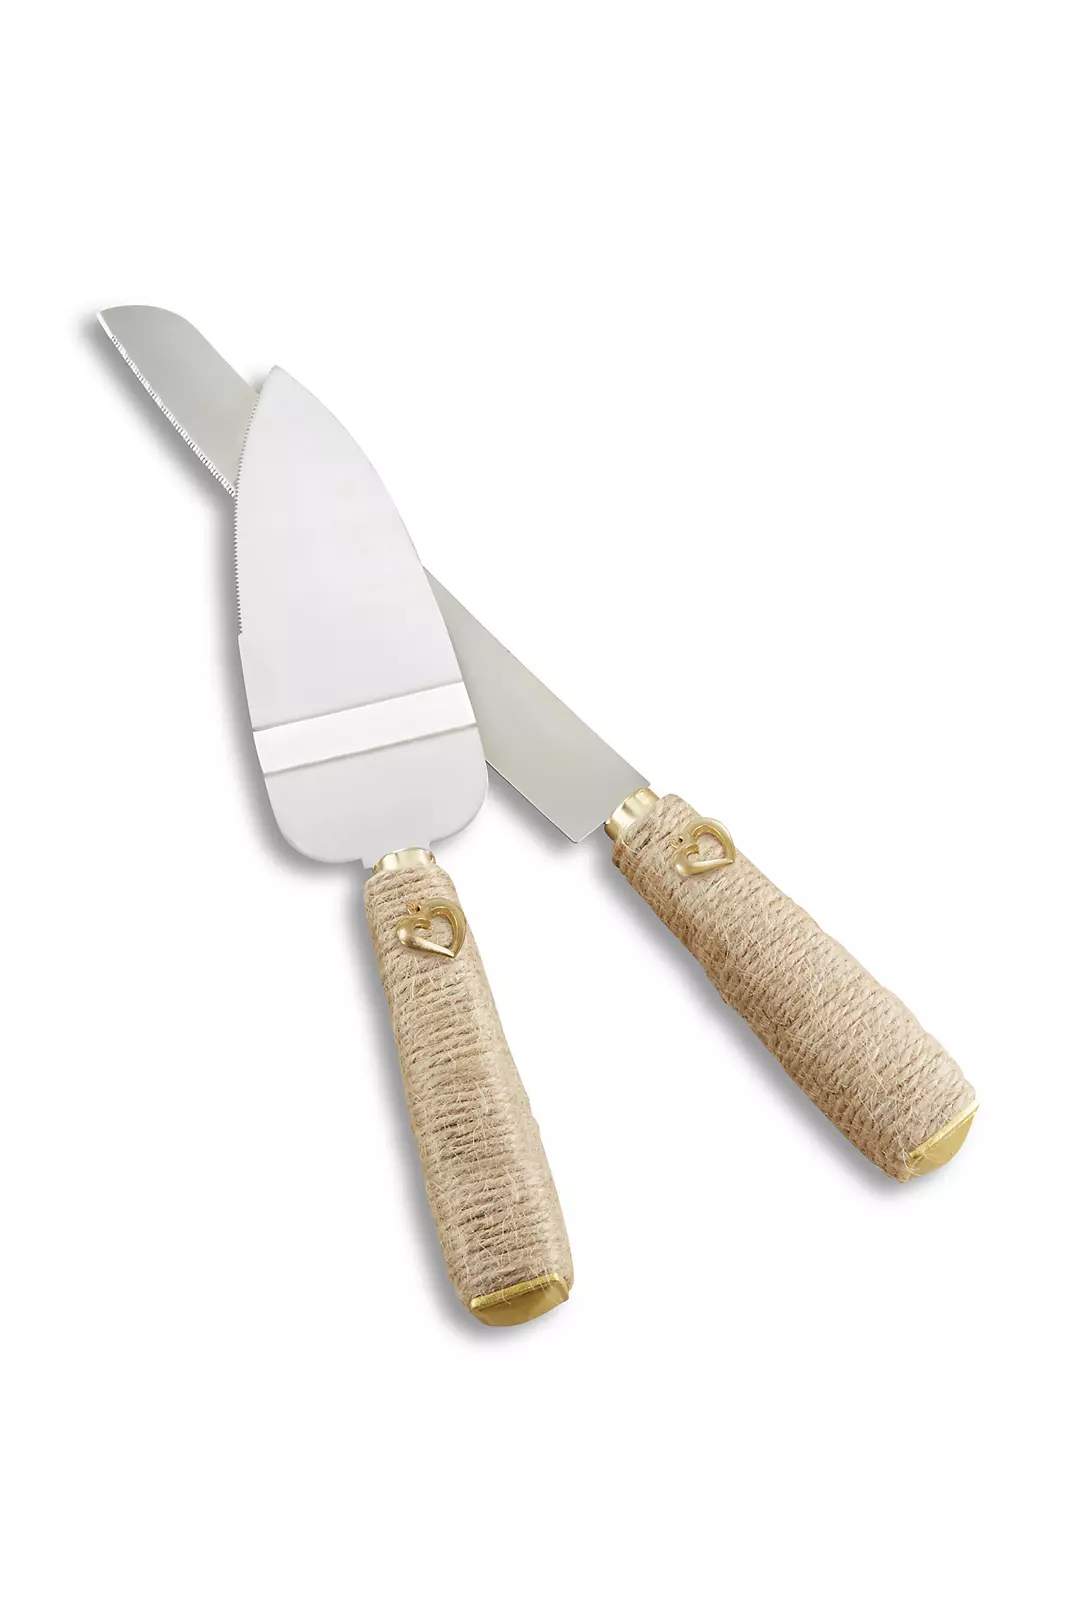 Rattan Wrapped Cake Knife and Server Set of 2